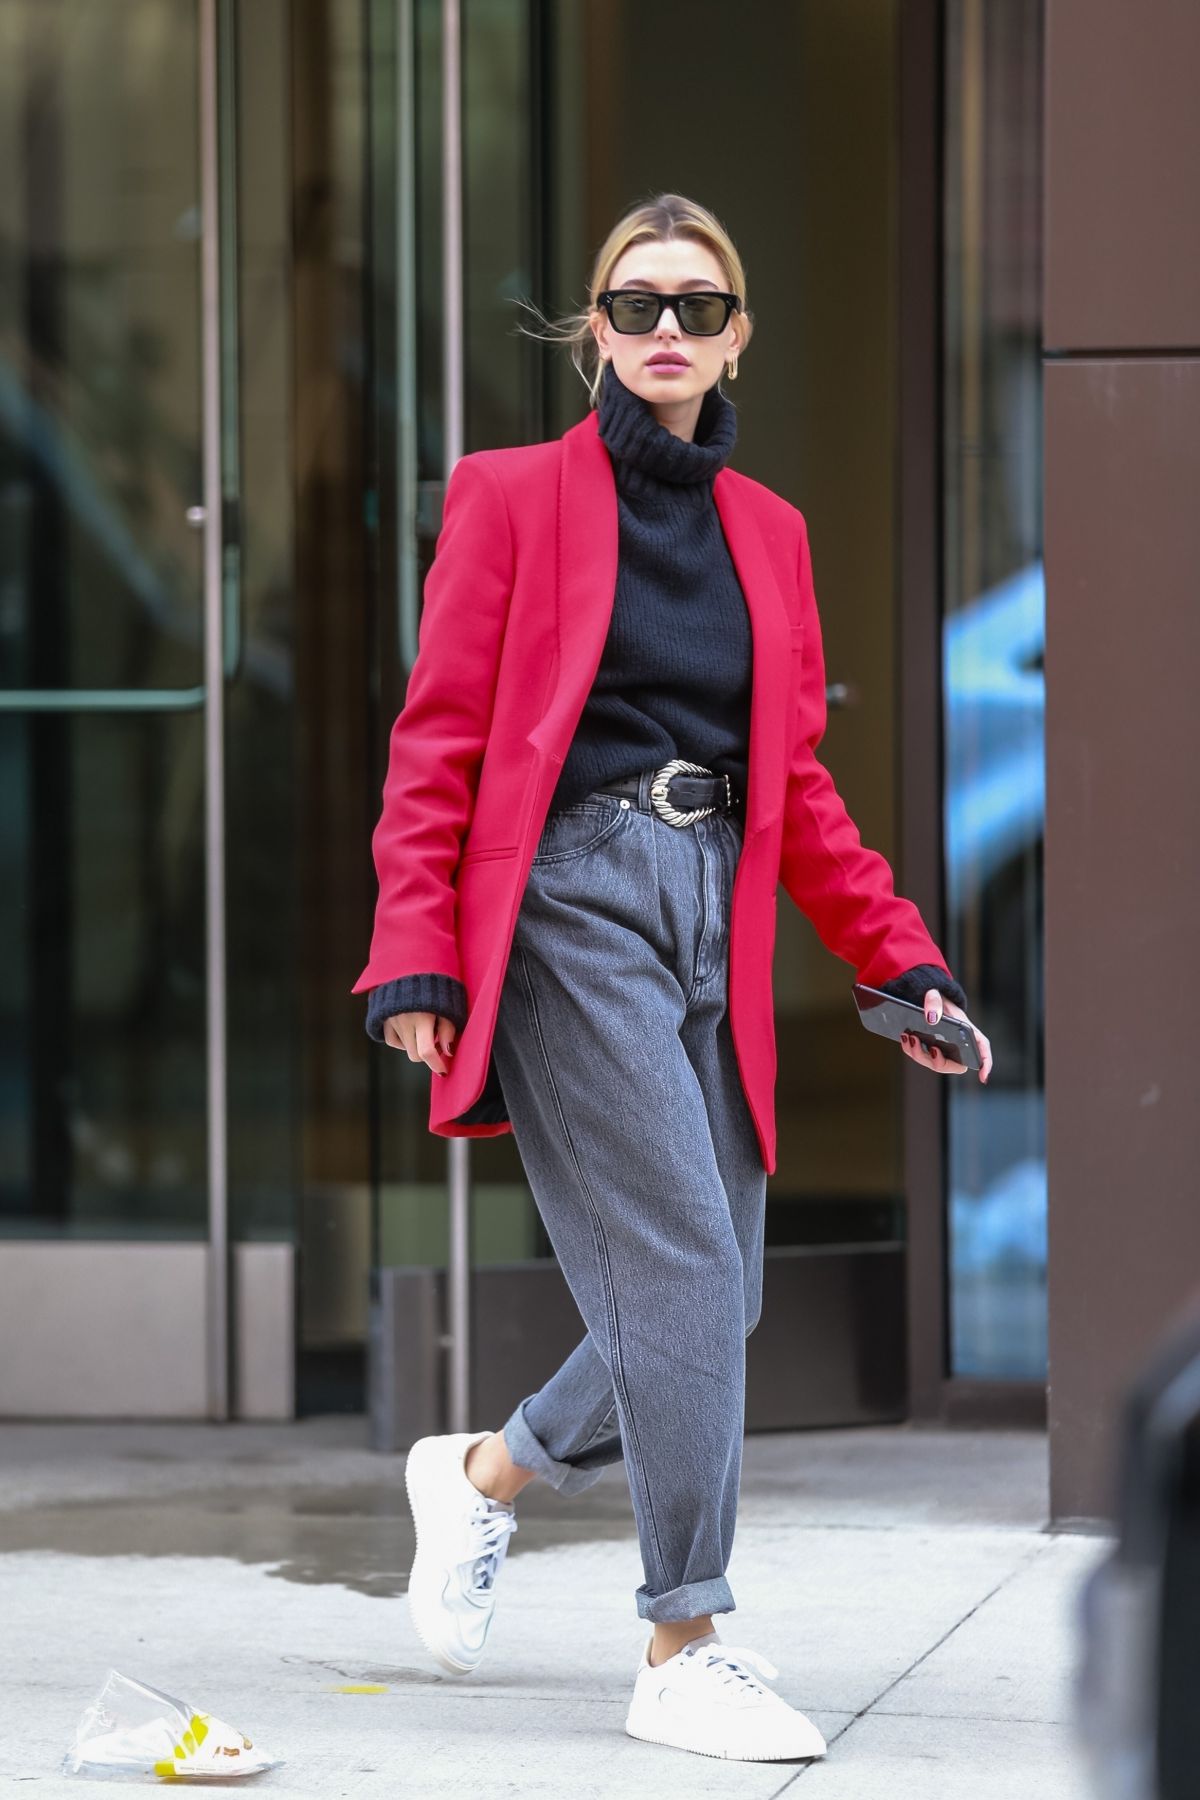 hailey-bieber-out-and-about-in-new-york-03-08-2019-2.jpg